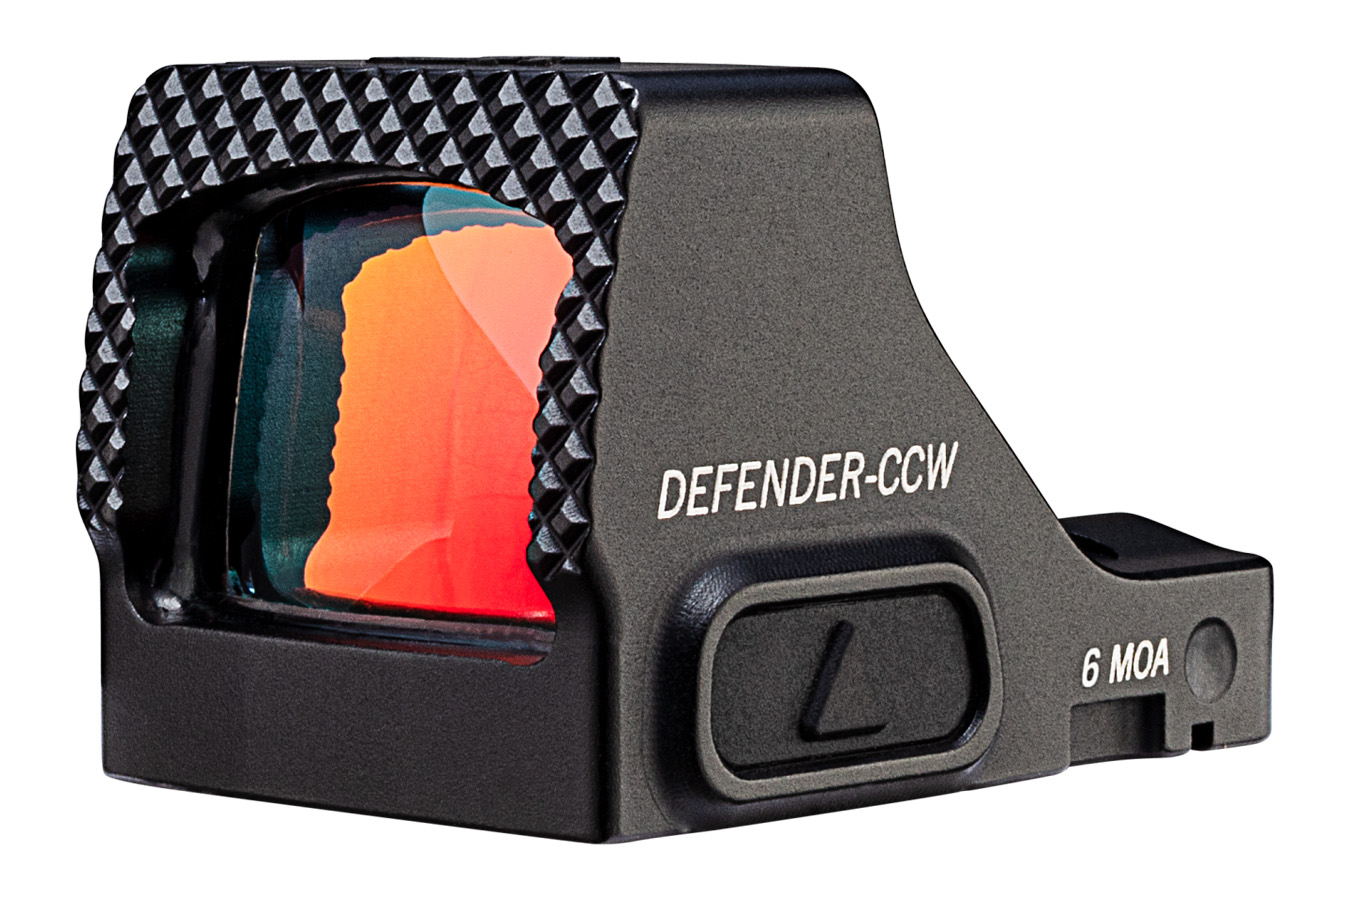 DEFENDER-CCW 6 MOA RED DOT